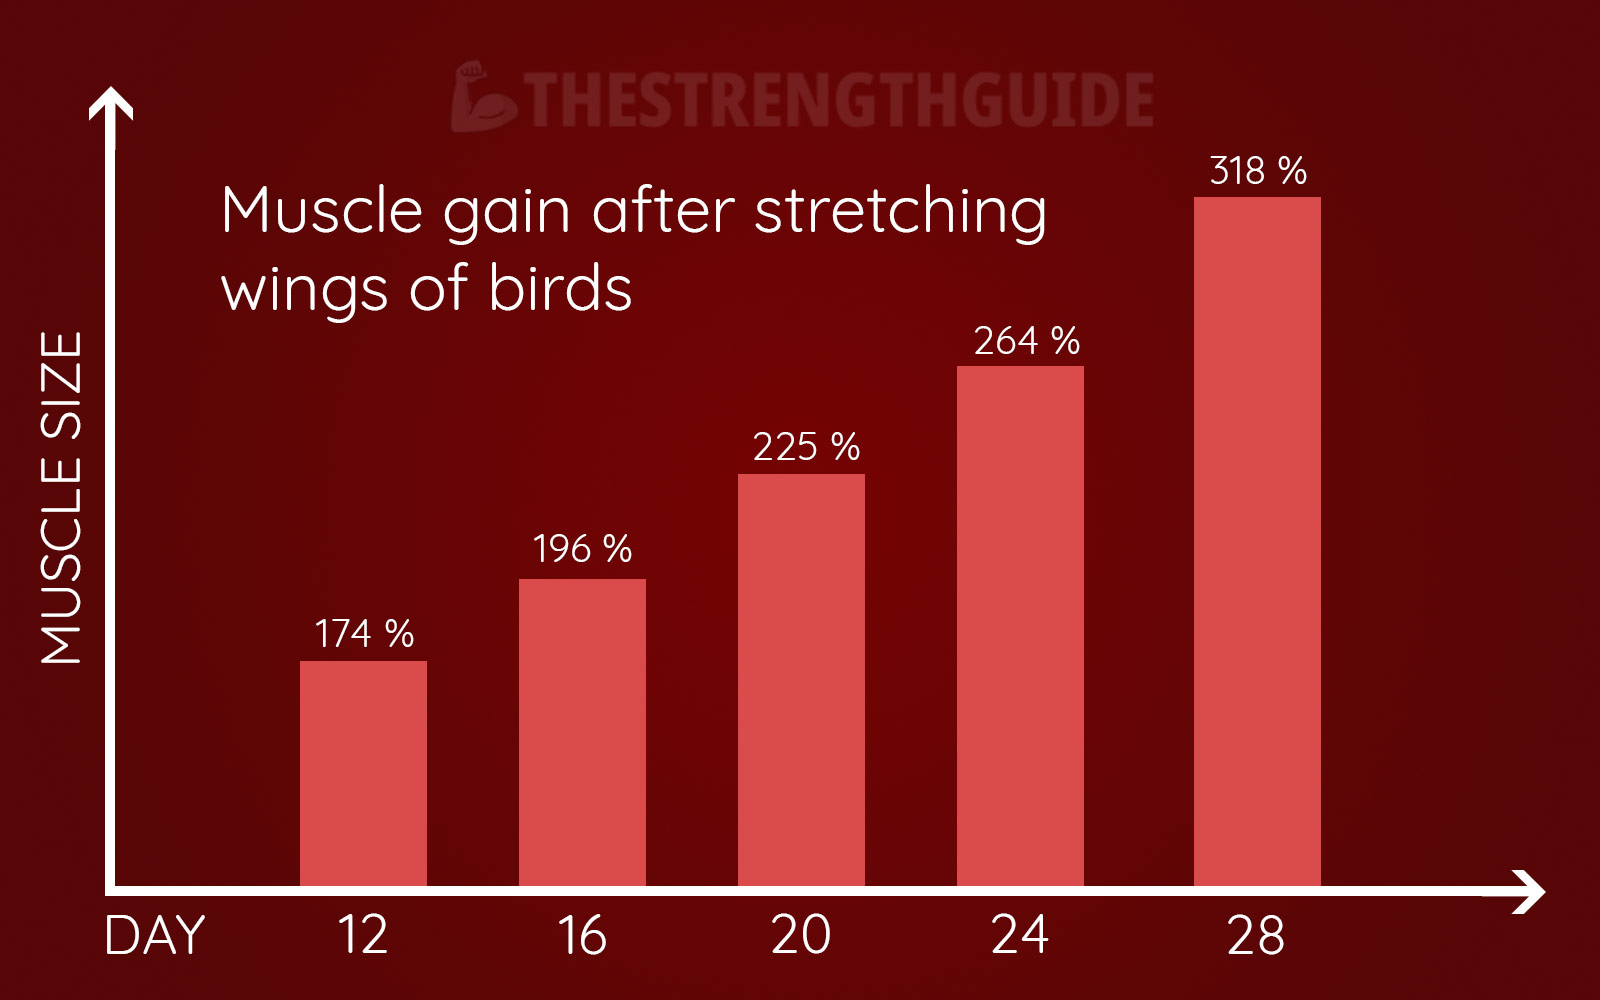 Illustration of muscle growth after stretching the wings of birds